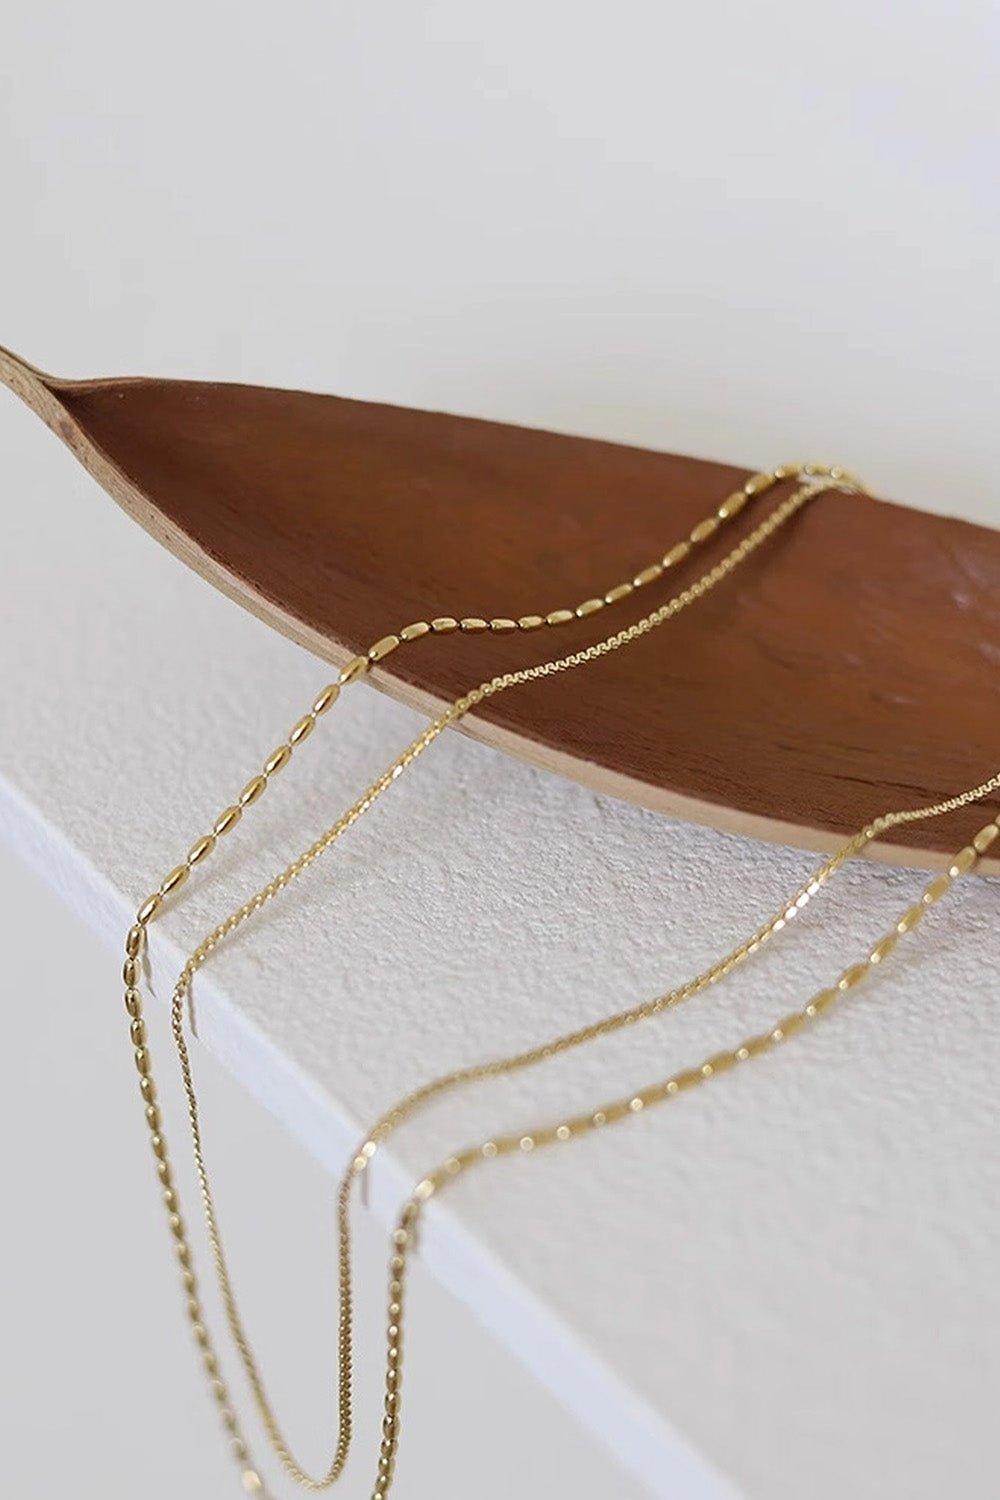 Gold Double Strand Dainty Chain Minimalist Necklace - Necklace - The Green Brick Boutique